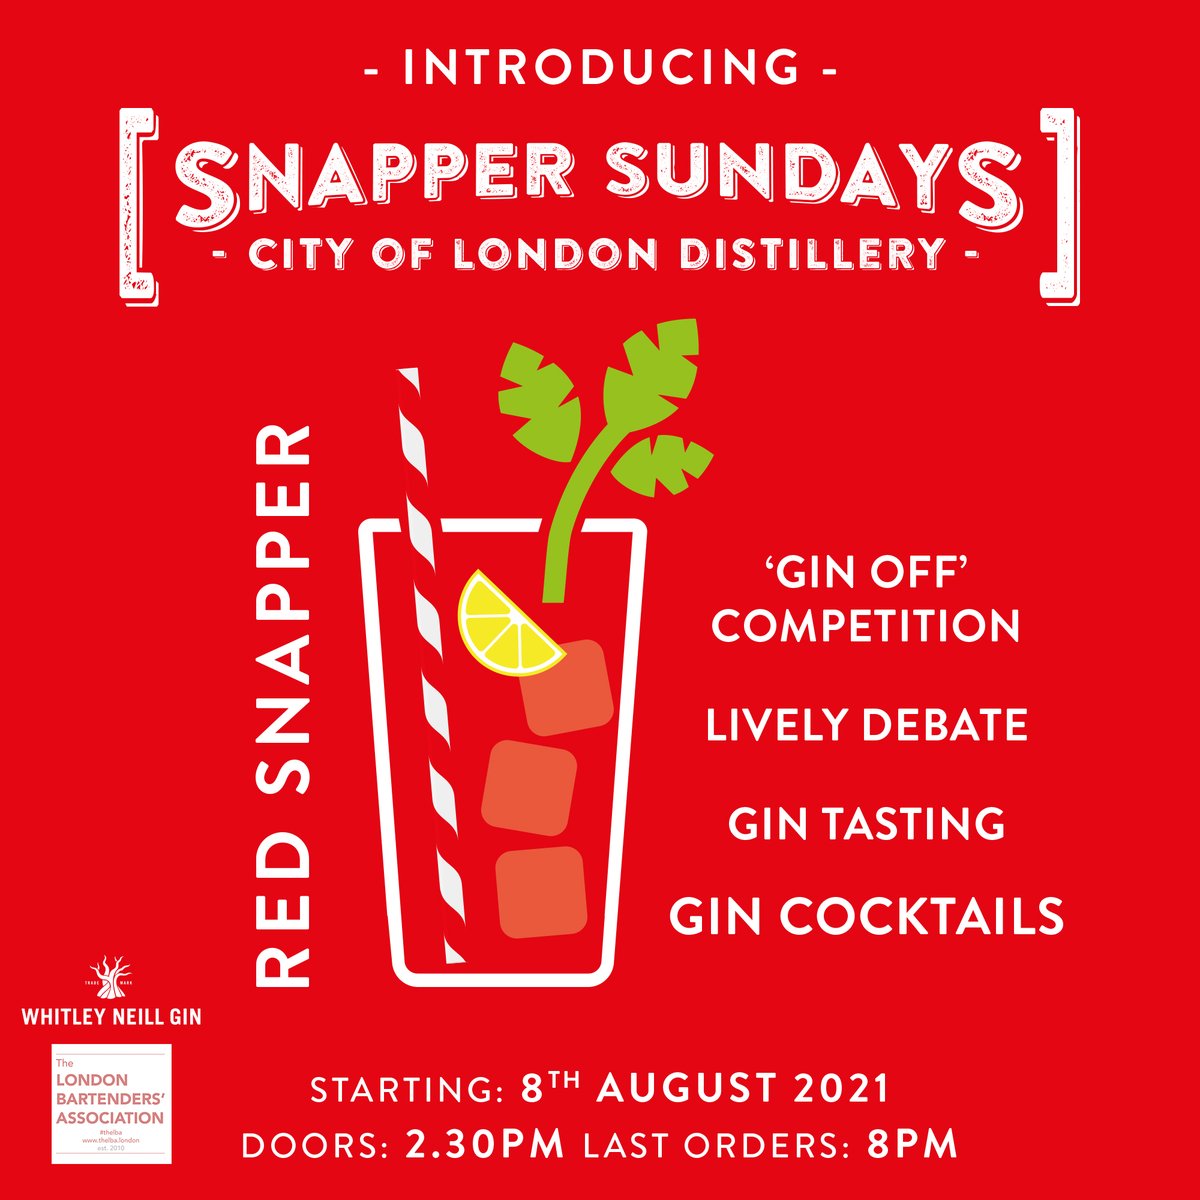 Calling all bartenders! 🙌 We're hosting the first Snapper Sundays session this Sunday (8th) for those in the drinks and hospitality industry. 🍸 Join us for a 'Gin Off', a bit of lively debate, and of course... cocktails. 😍 @WhitleyNeill Sign up here! bit.ly/2ViAa17